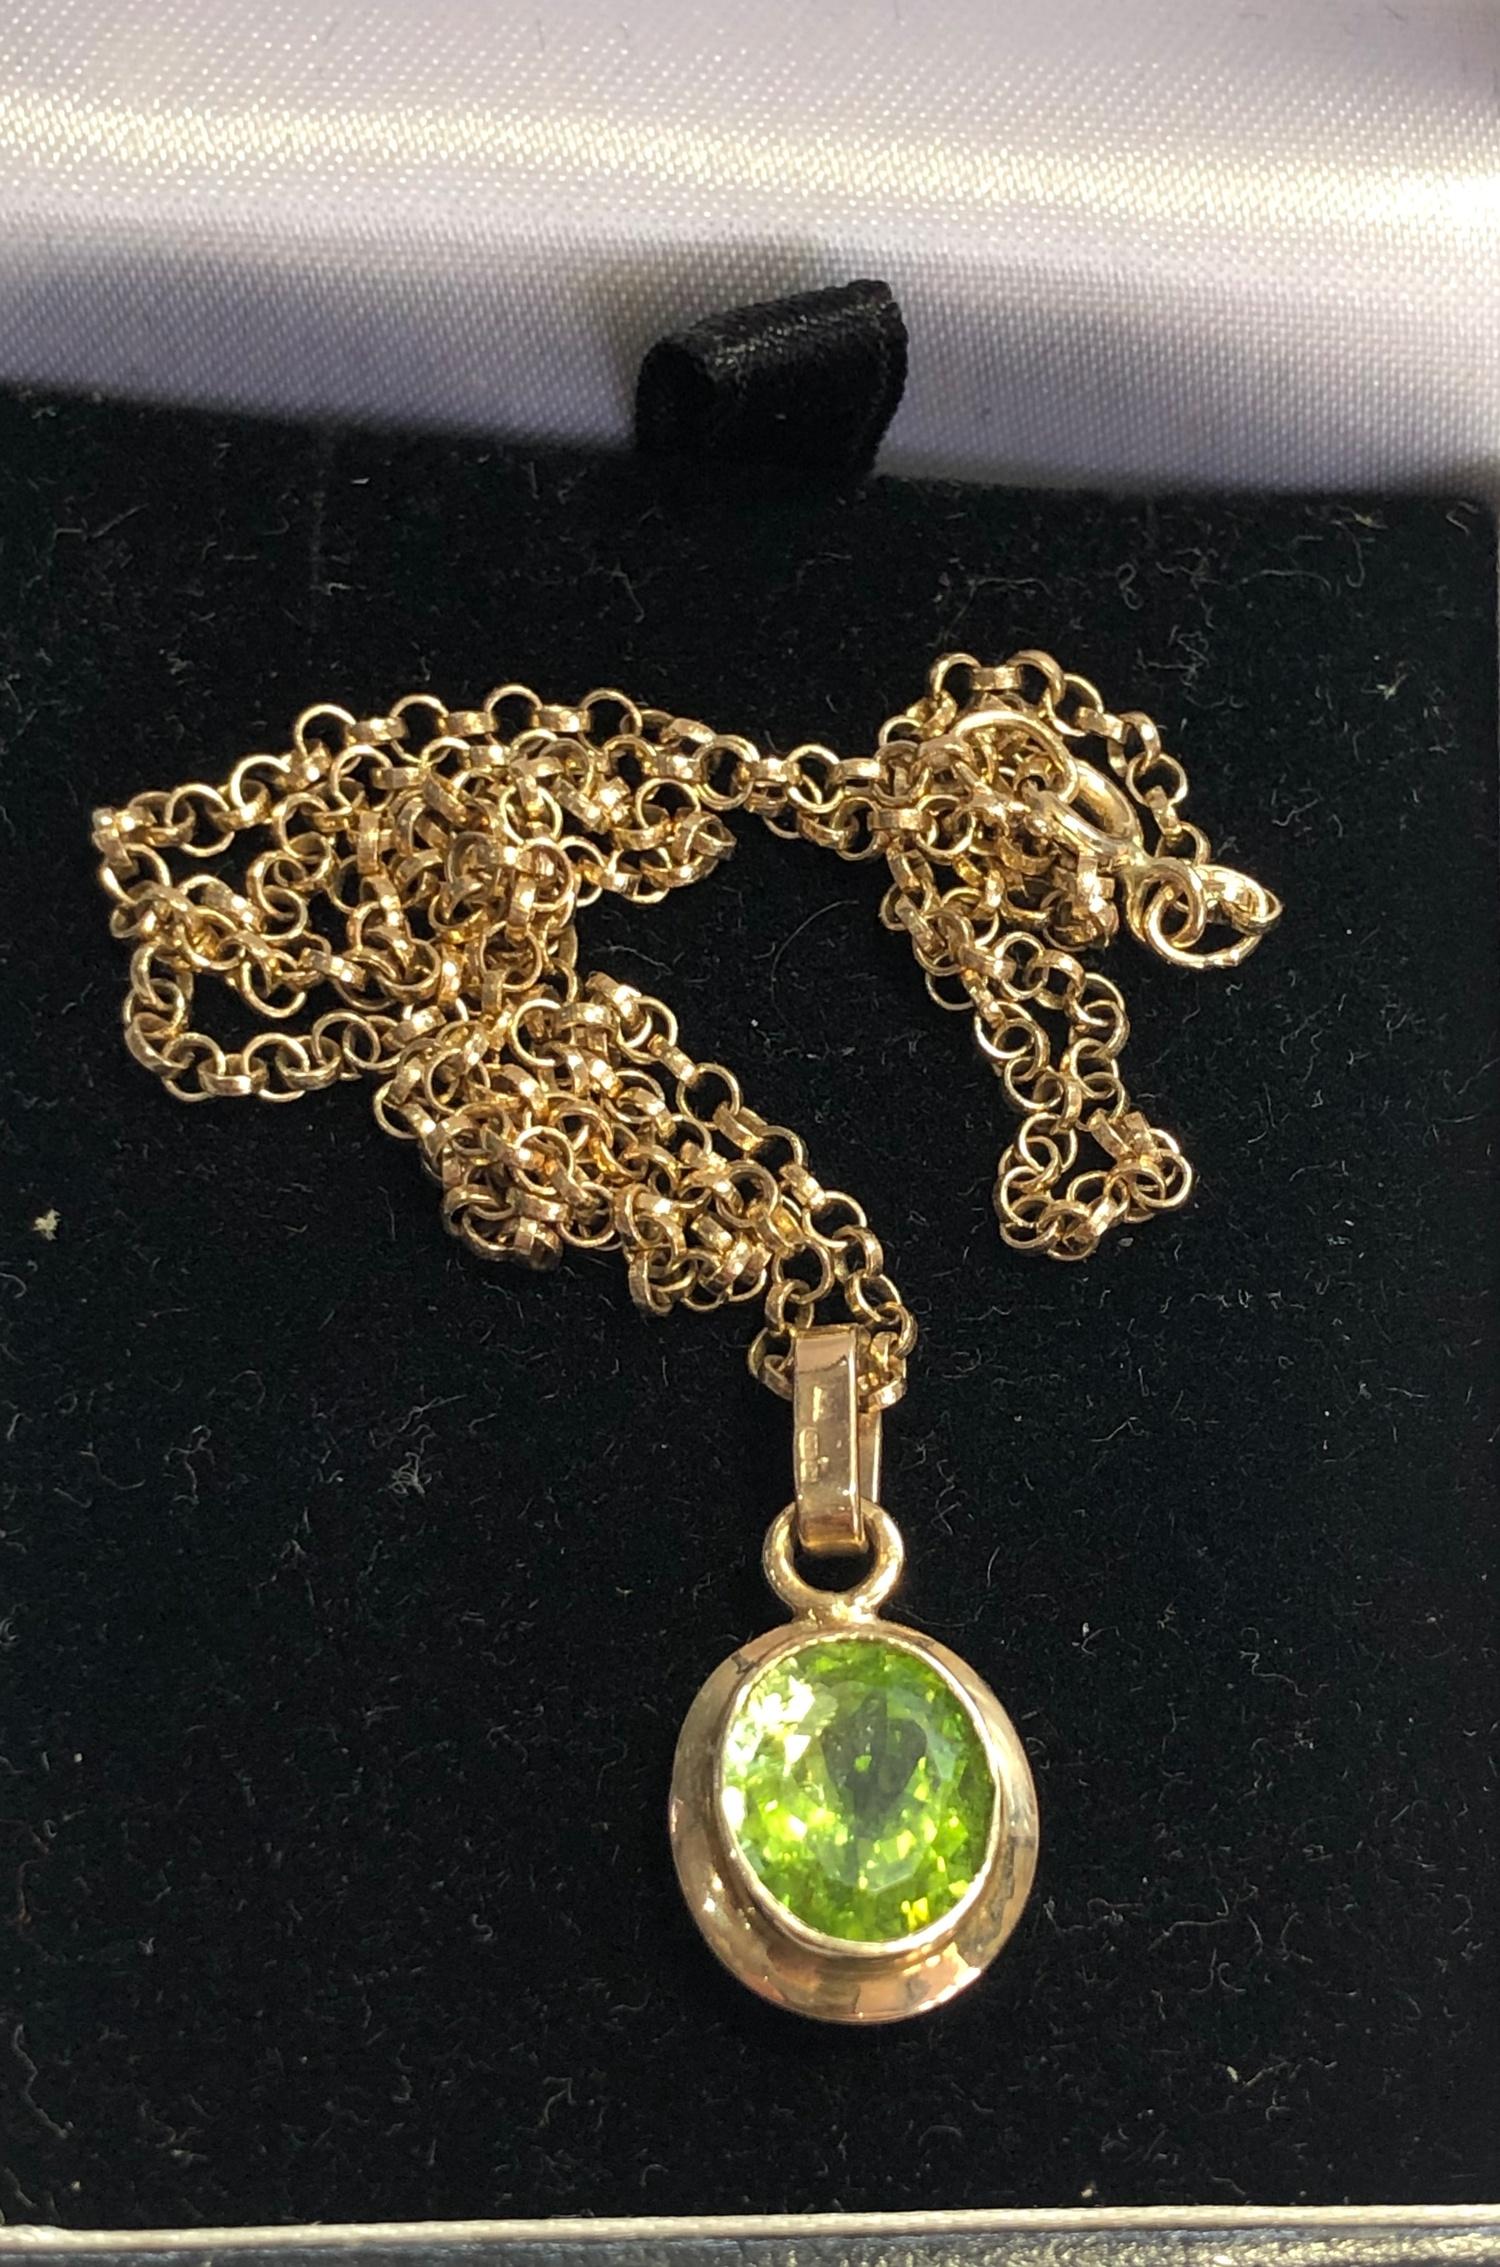 9ct Gold Peridot pendant and chain stone measures approx 10mm by 9mm with a gold chain that measures - Image 2 of 3